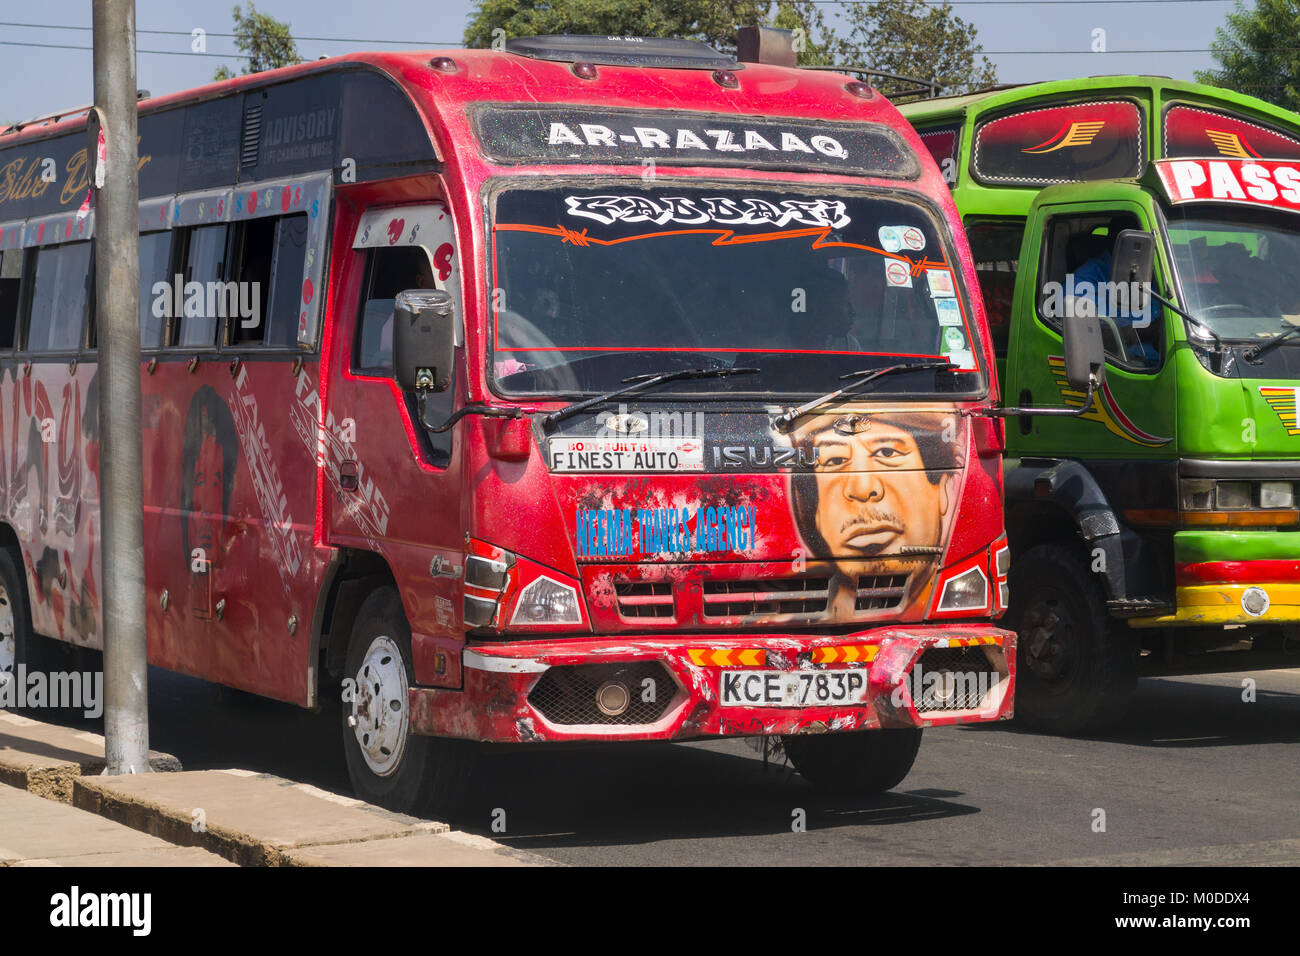 A red bus with a painting of Muammar Gaddafi on the front waits in traffic, Nairobi, Kenya, East Africa Stock Photo